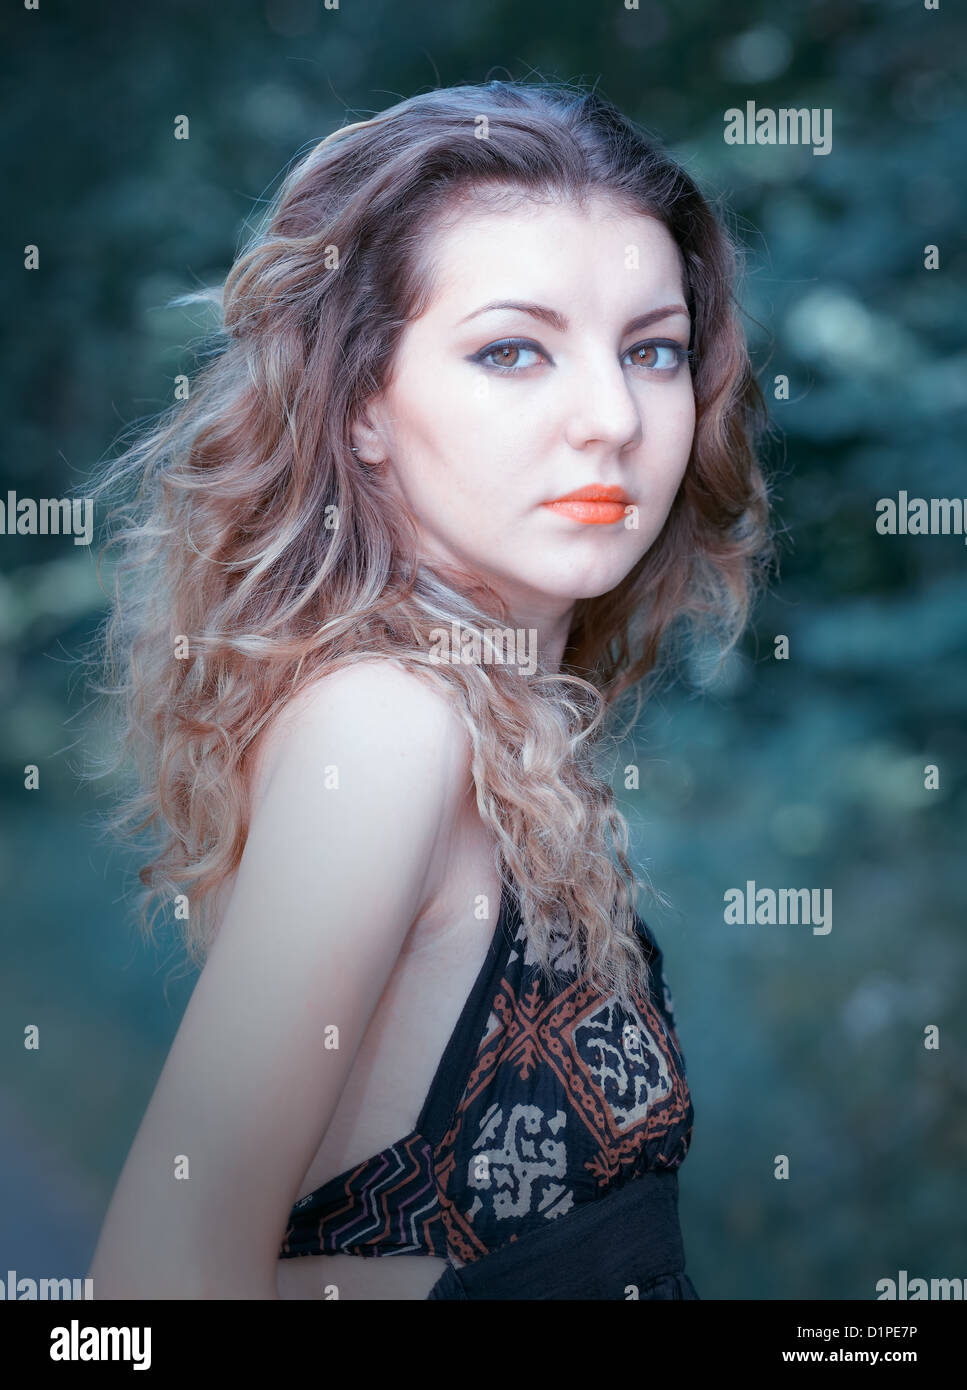 Portrait of a sad 20 year old woman looking at camera over shoulder. Stock Photo